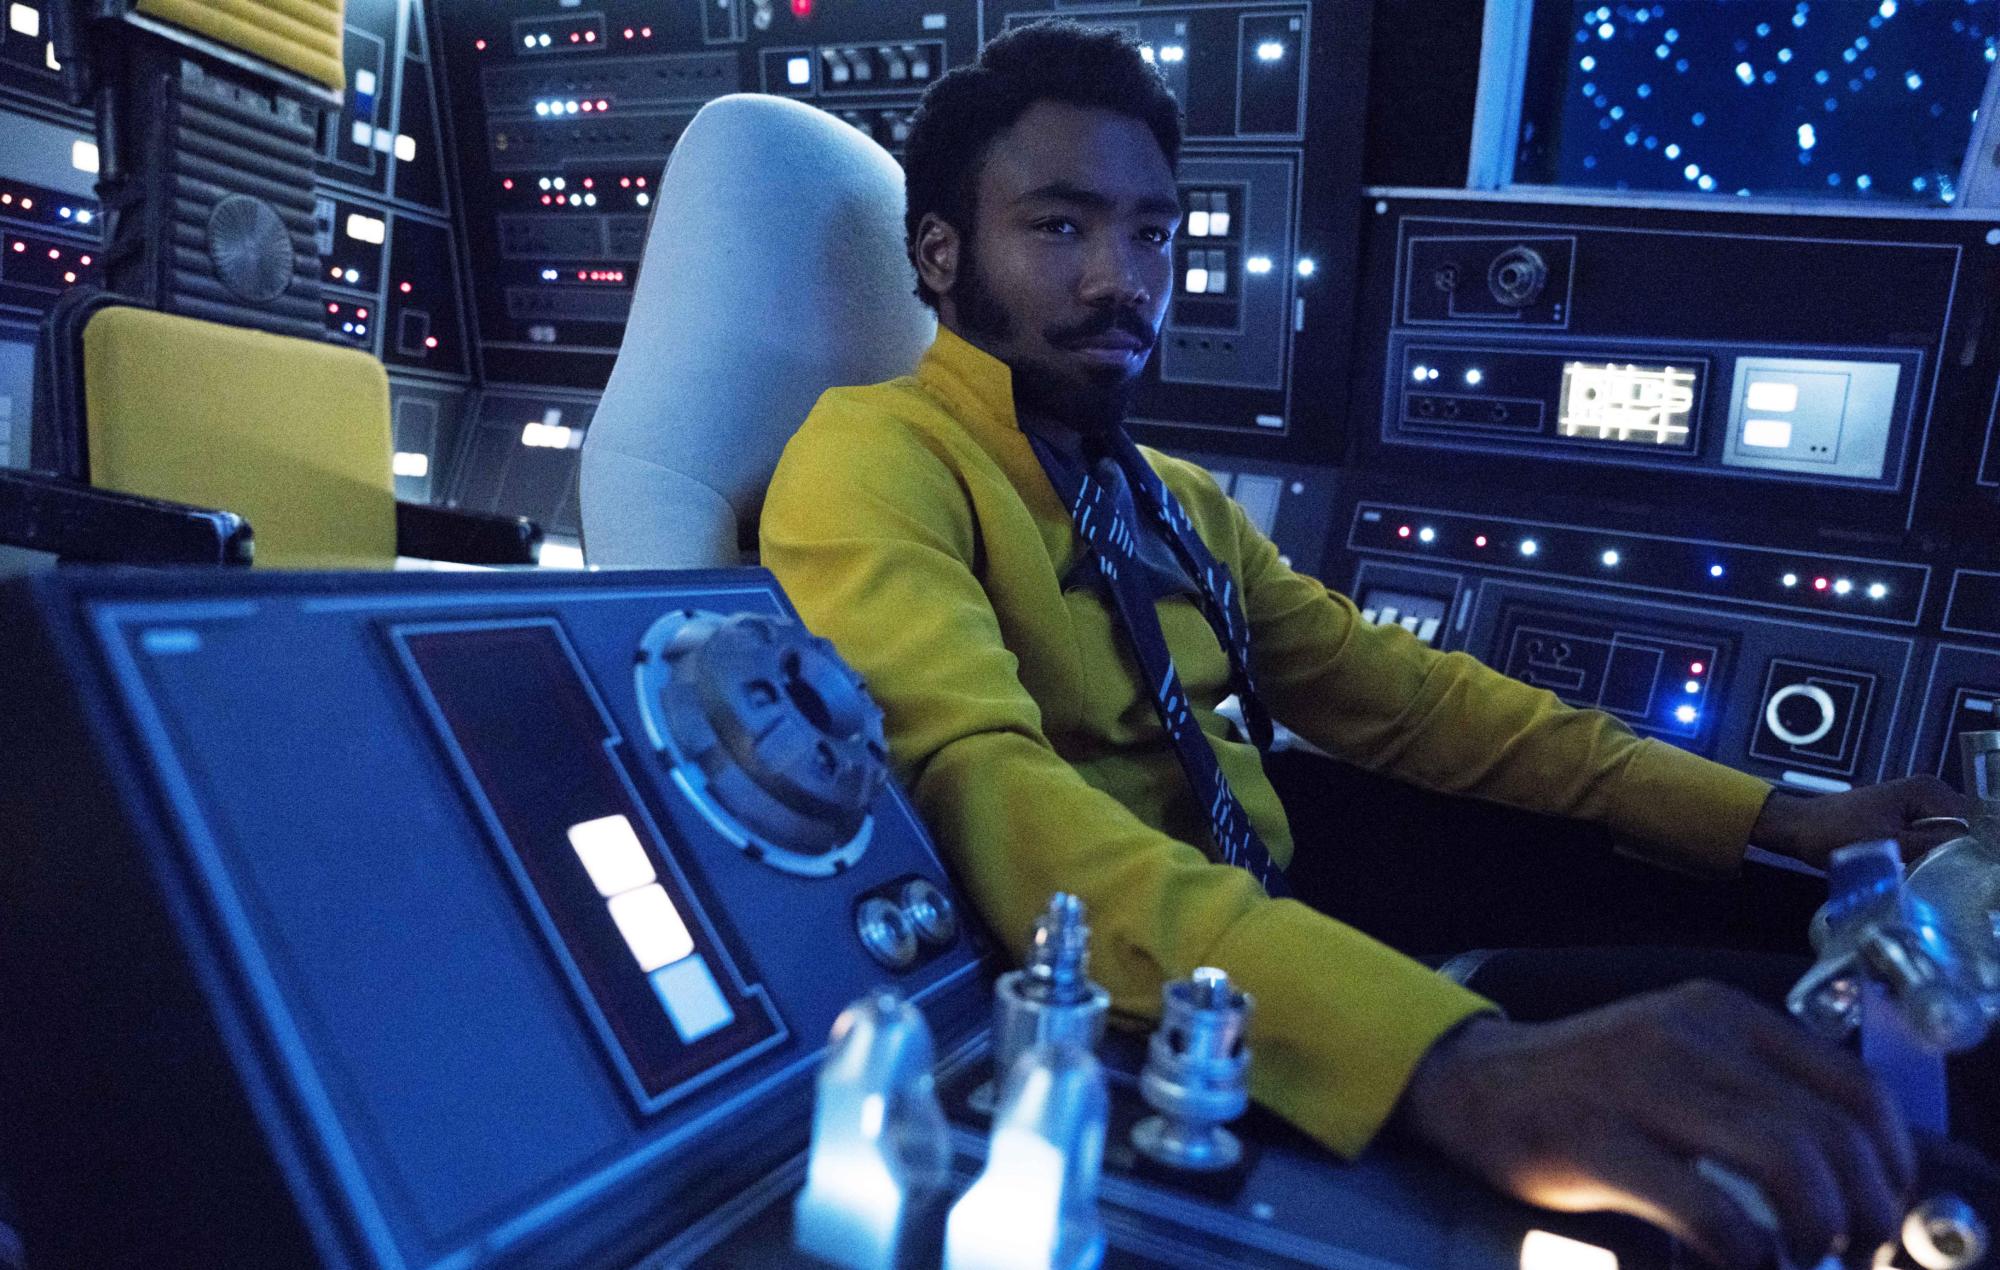 Donald Glover “in talks” to return as Lando Calrissian in new ‘Star Wars’ series